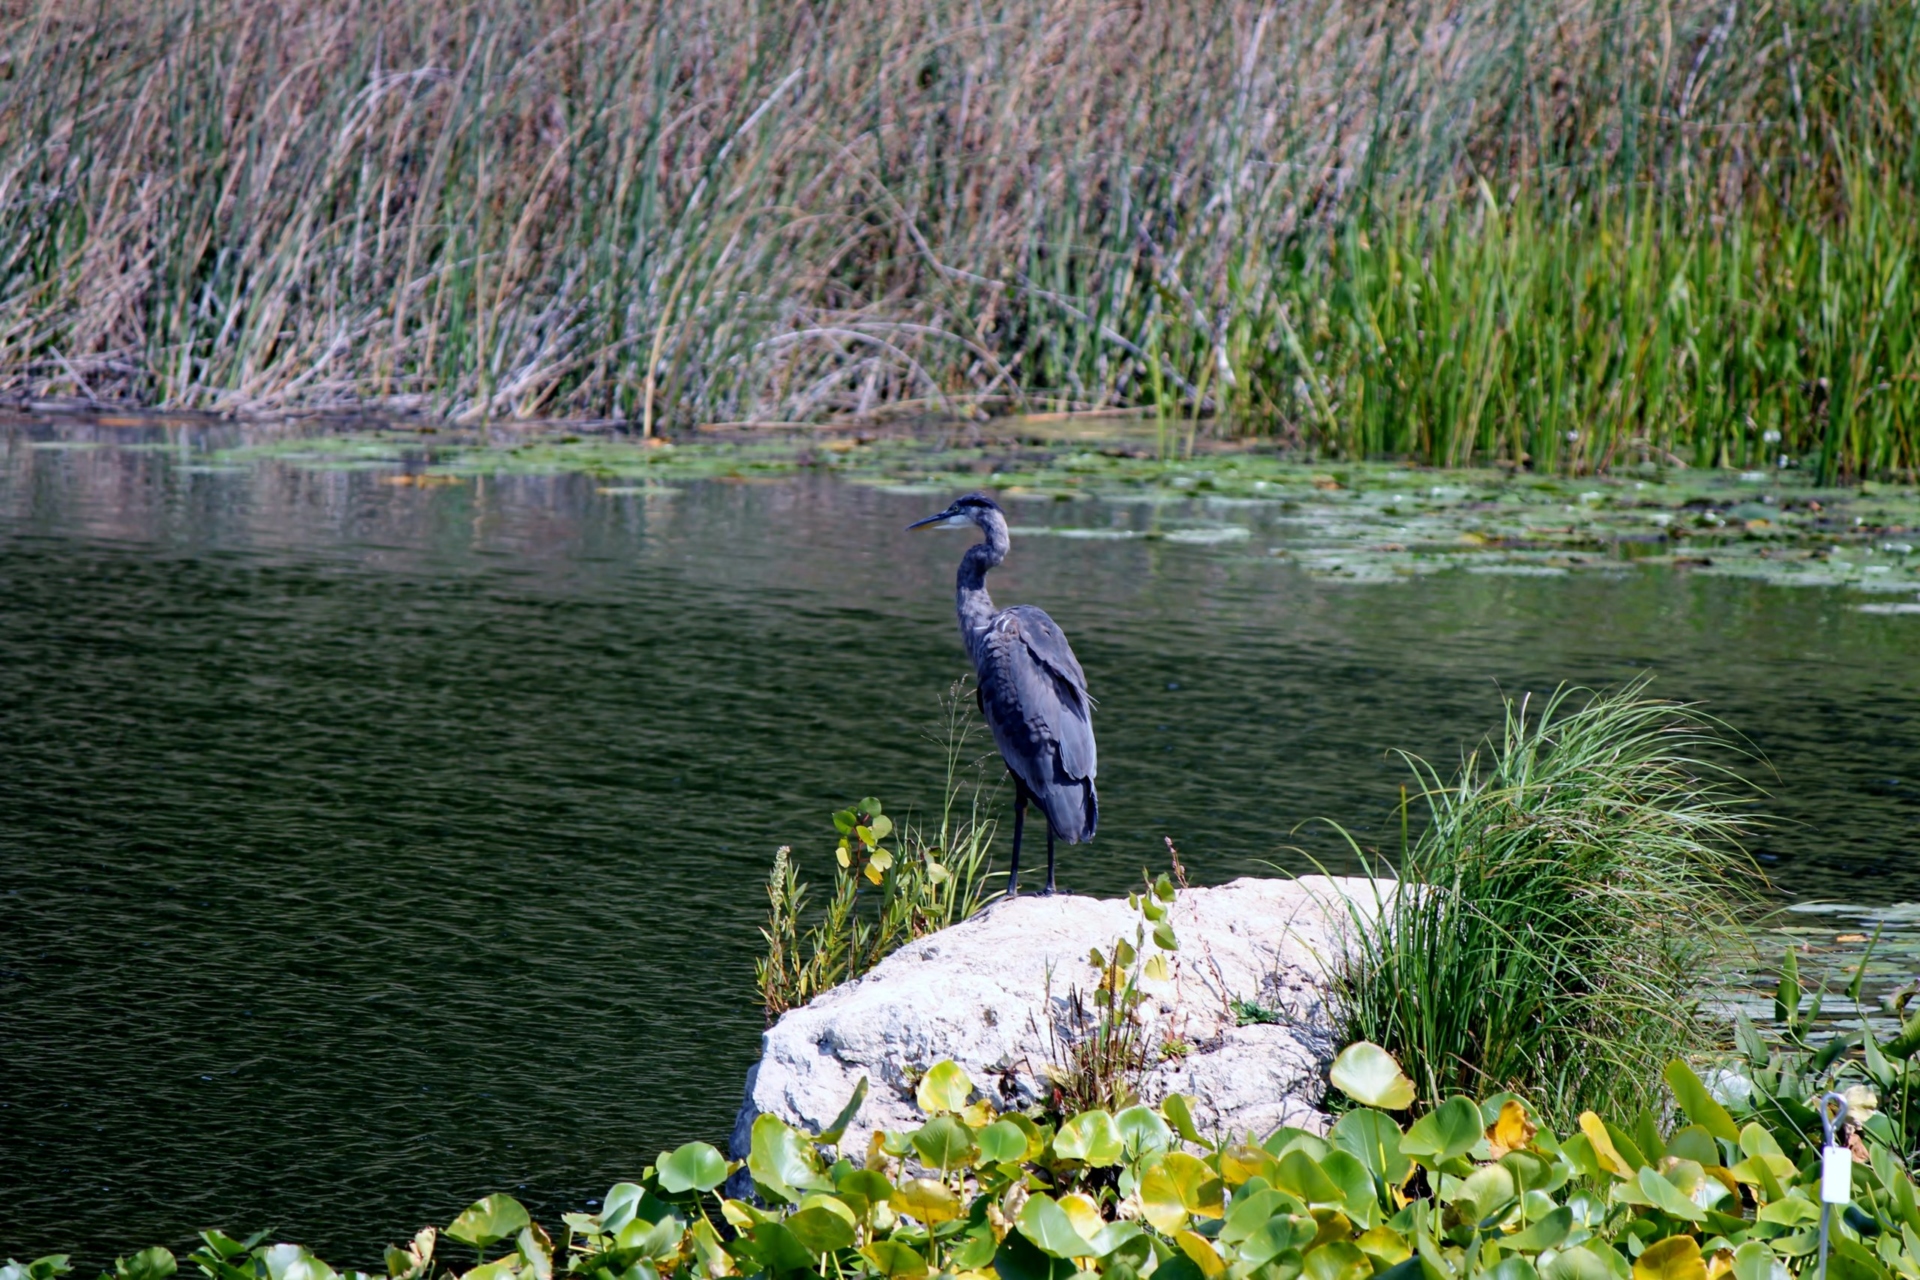 Photo of a heron overlooking a body of water